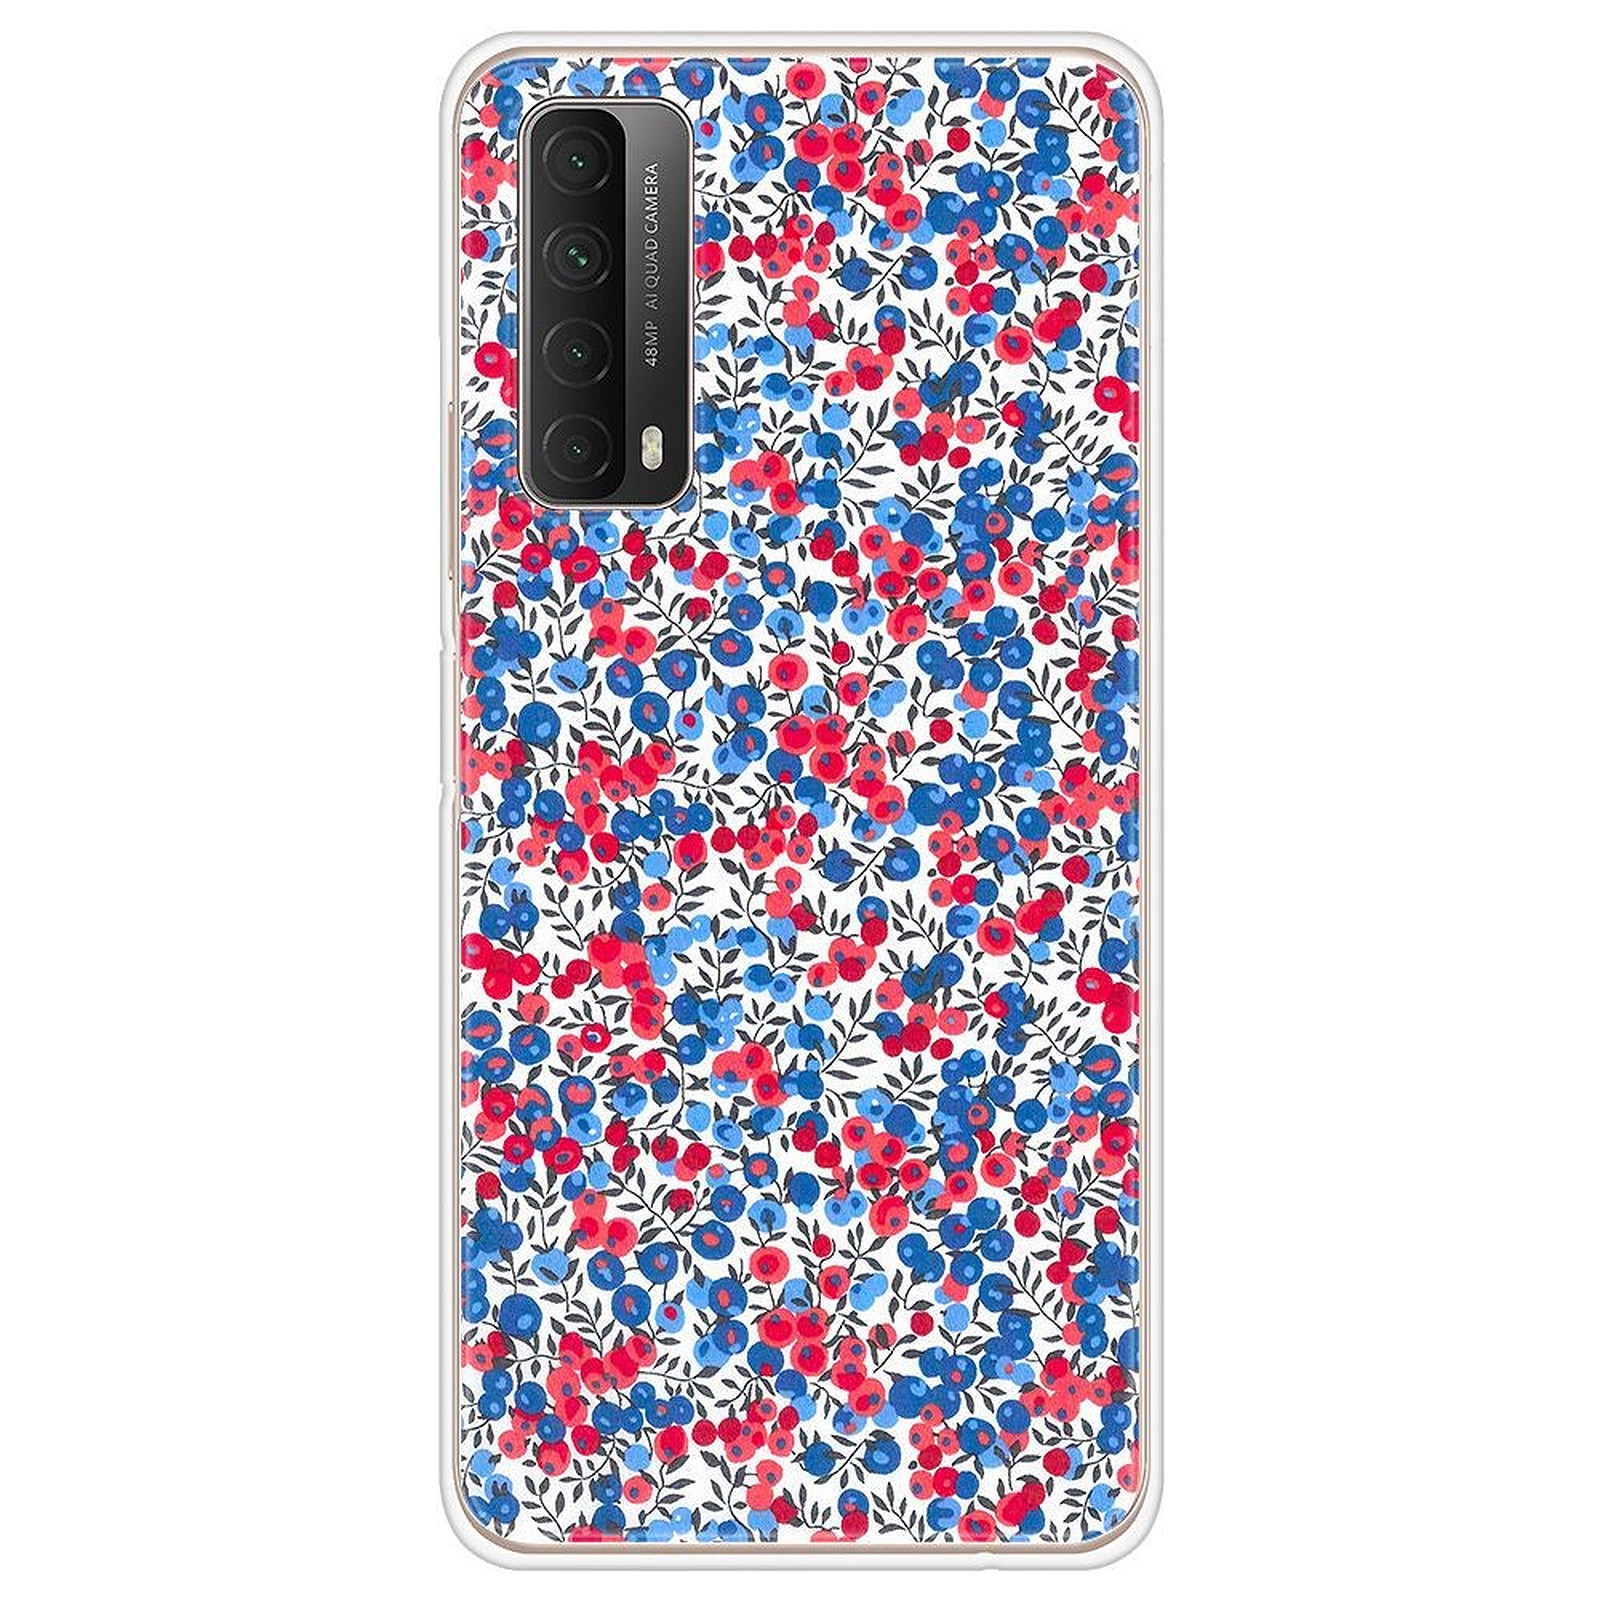 1001 Coques Coque silicone gel Huawei P Smart 2021 motif Liberty Wiltshire Bleu - Coque telephone 1001Coques